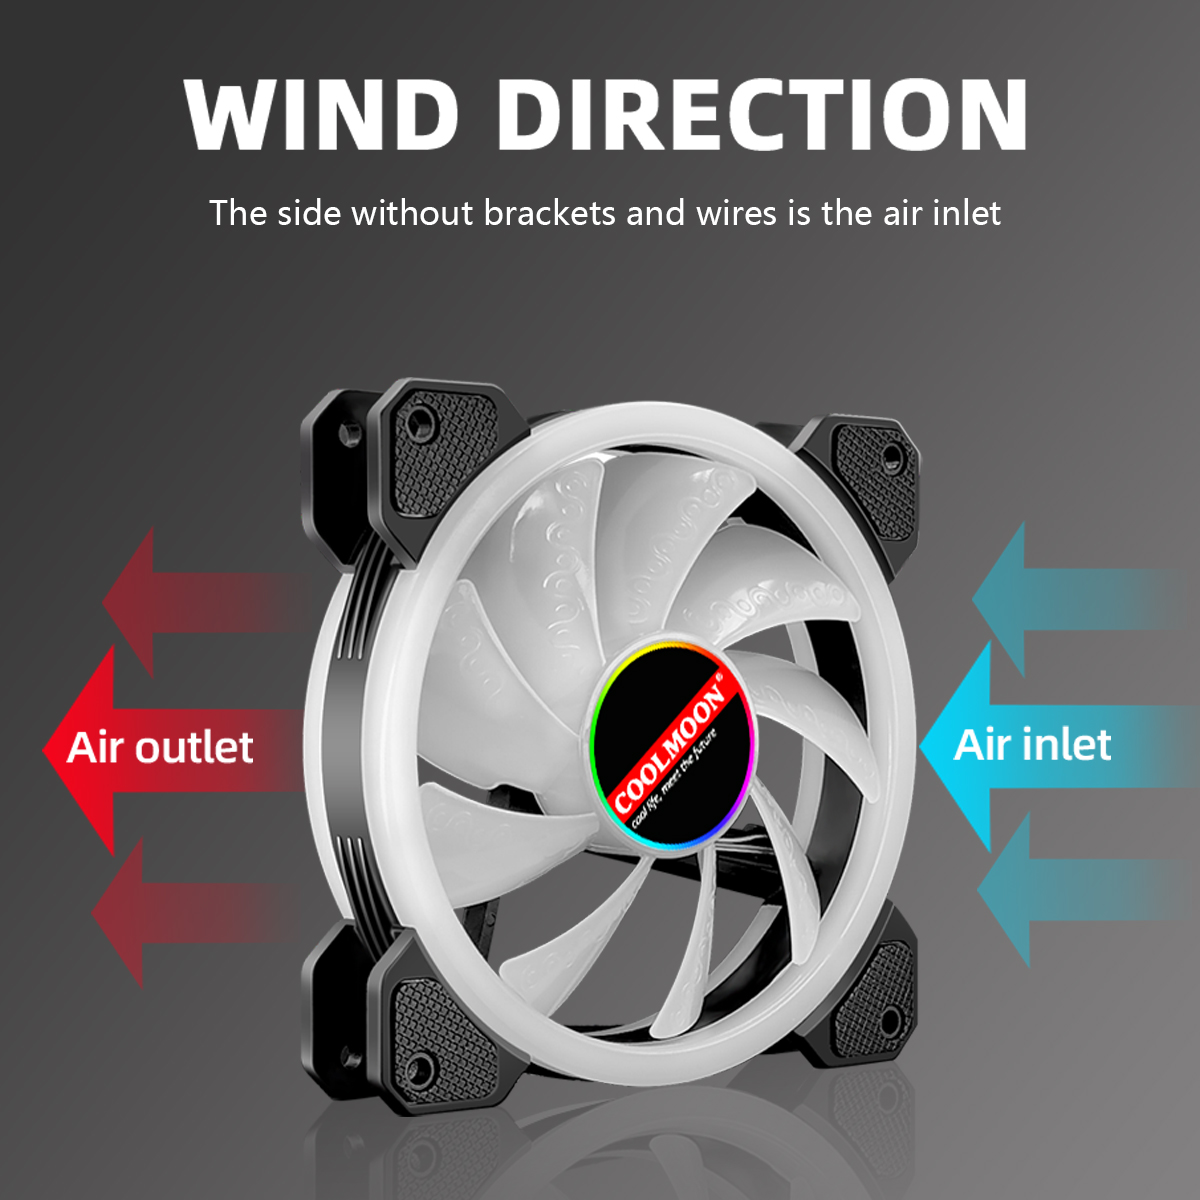 120mm-Computer-PC-Cooler-Cooling-Fan-RGB-LED-Multicolor-mode-Quiet-Chassis-Fan-With-Controller-1940489-3